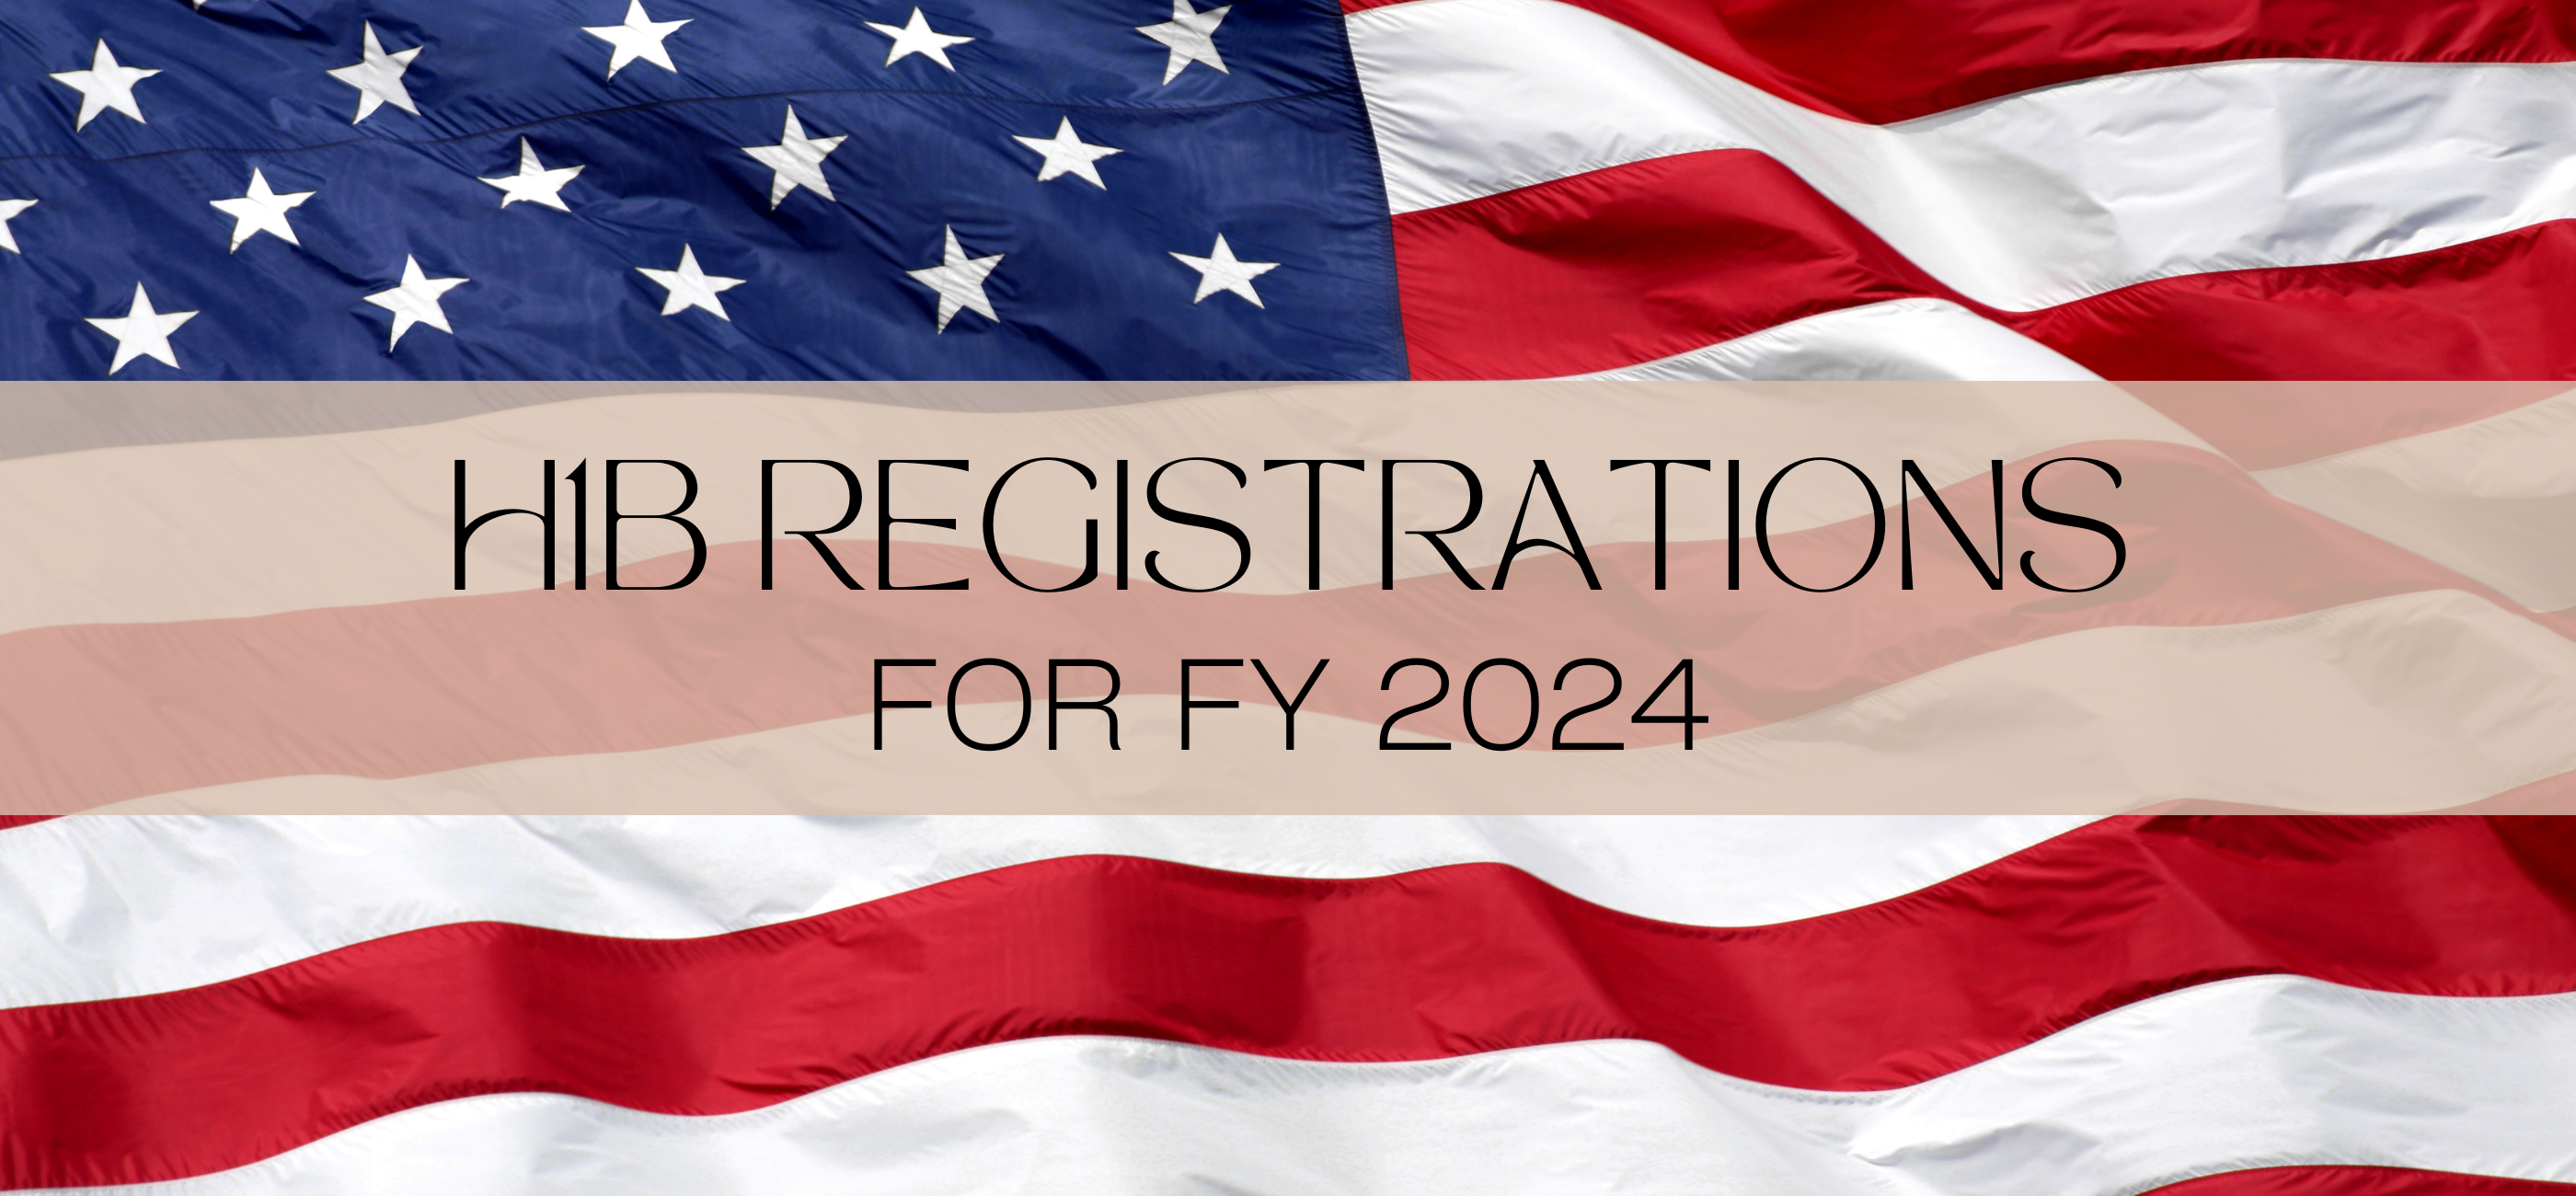 The US Citizenship and Immigration Services (USCIS) conducted the H1B Lottery for the fiscal year (FY) 2024 season during the last week of March 2023. Many have been eagerly waiting to know the total count of H1B registrations, how many were selected, and other common statistics related to the H1B Visa 2024 season. According to the latest data from USCIS, they have received 781,000 H1B registration for the upcoming season.